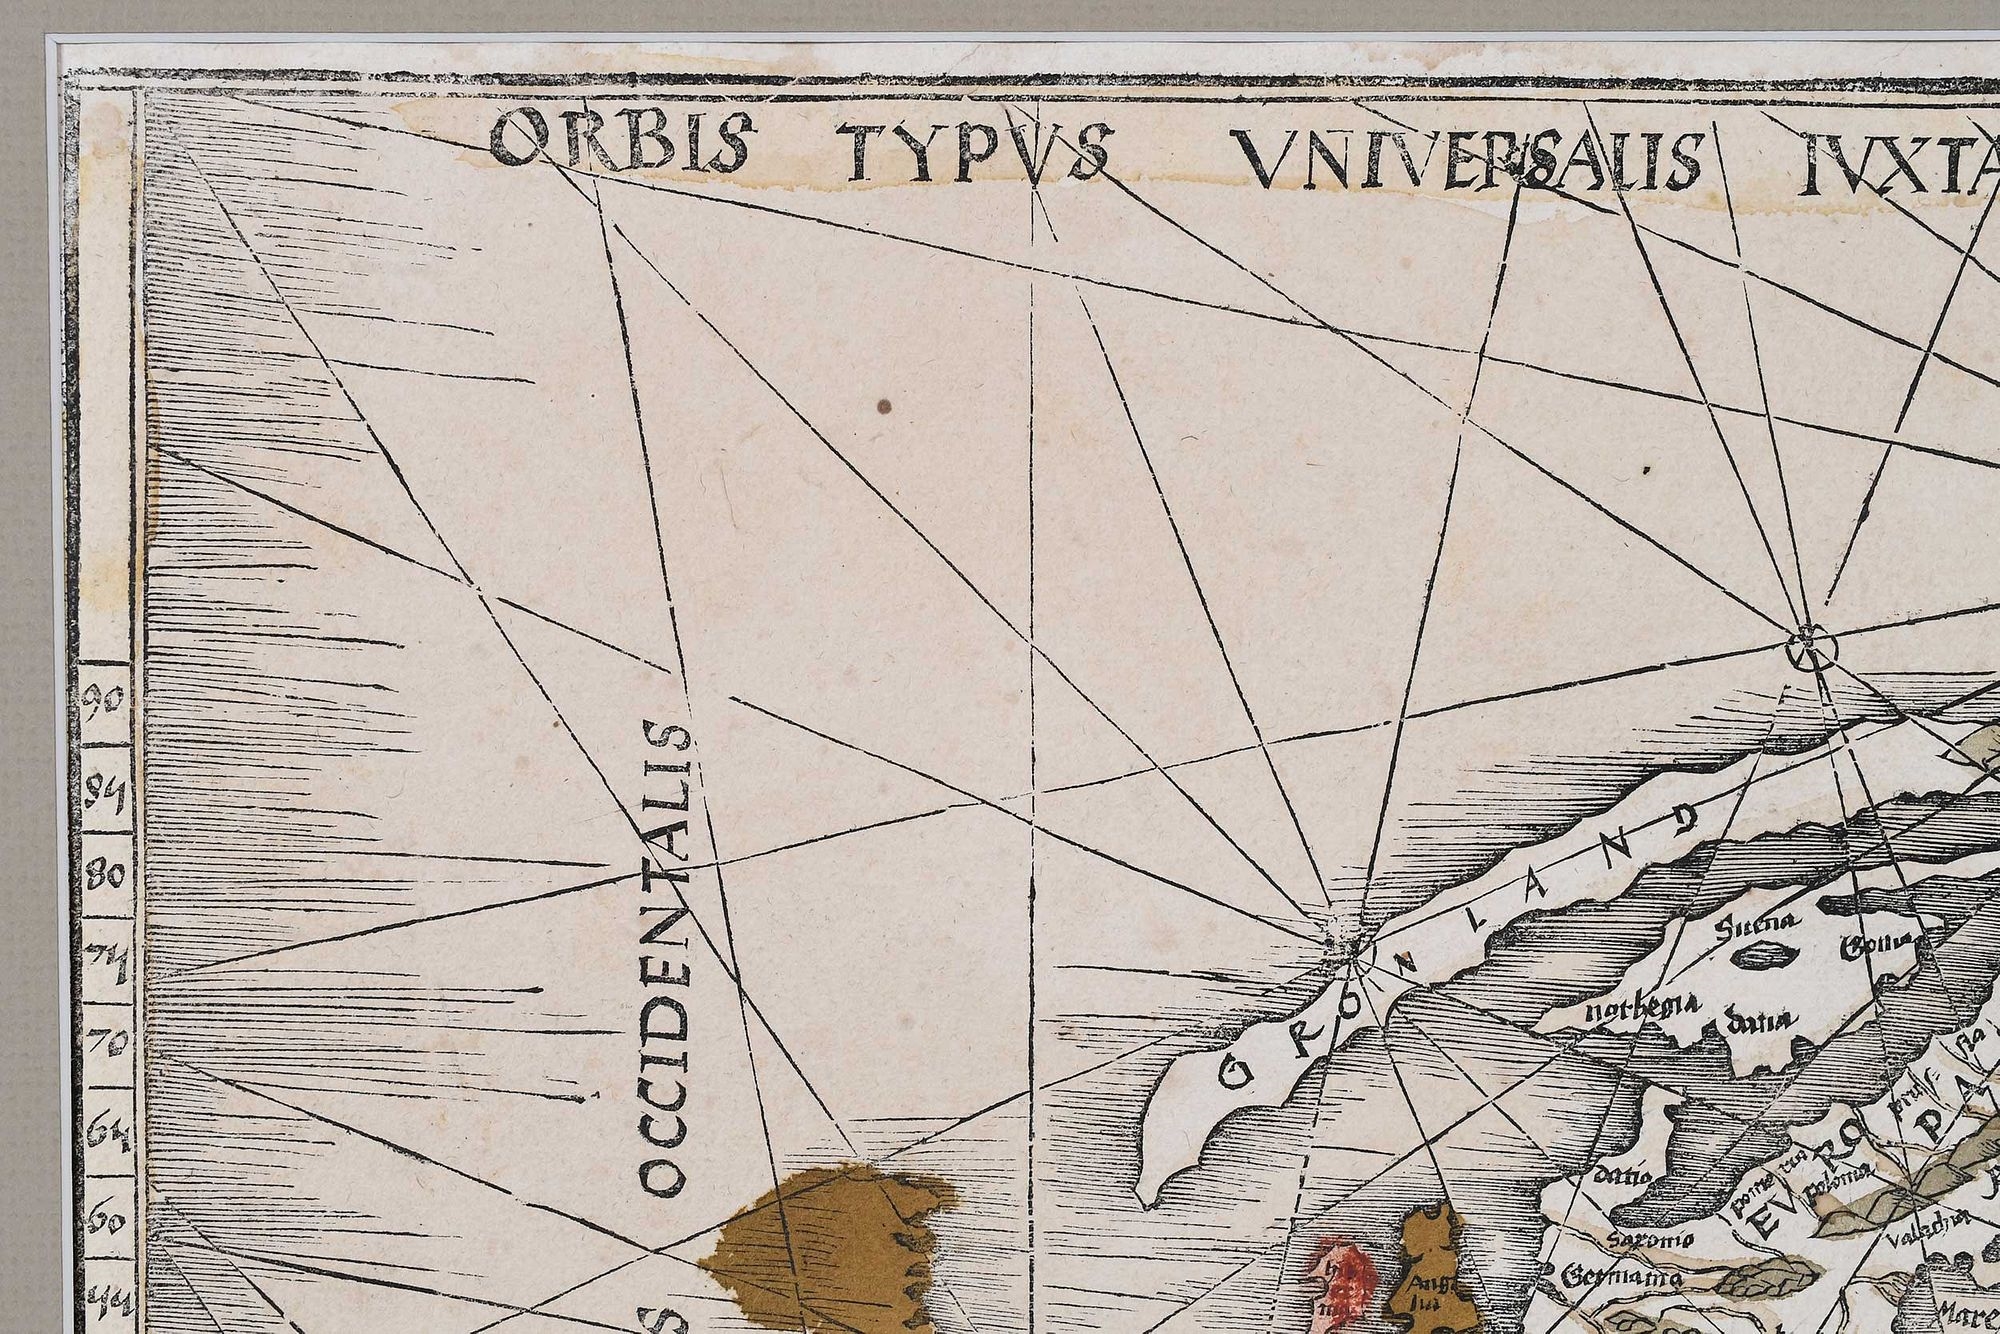 Artwork by Martin Waldseemuller, Orbis Typus Universalis Luxta Hydrographorum Traditionem, Made of engraving on laid paper with hand colored highlights